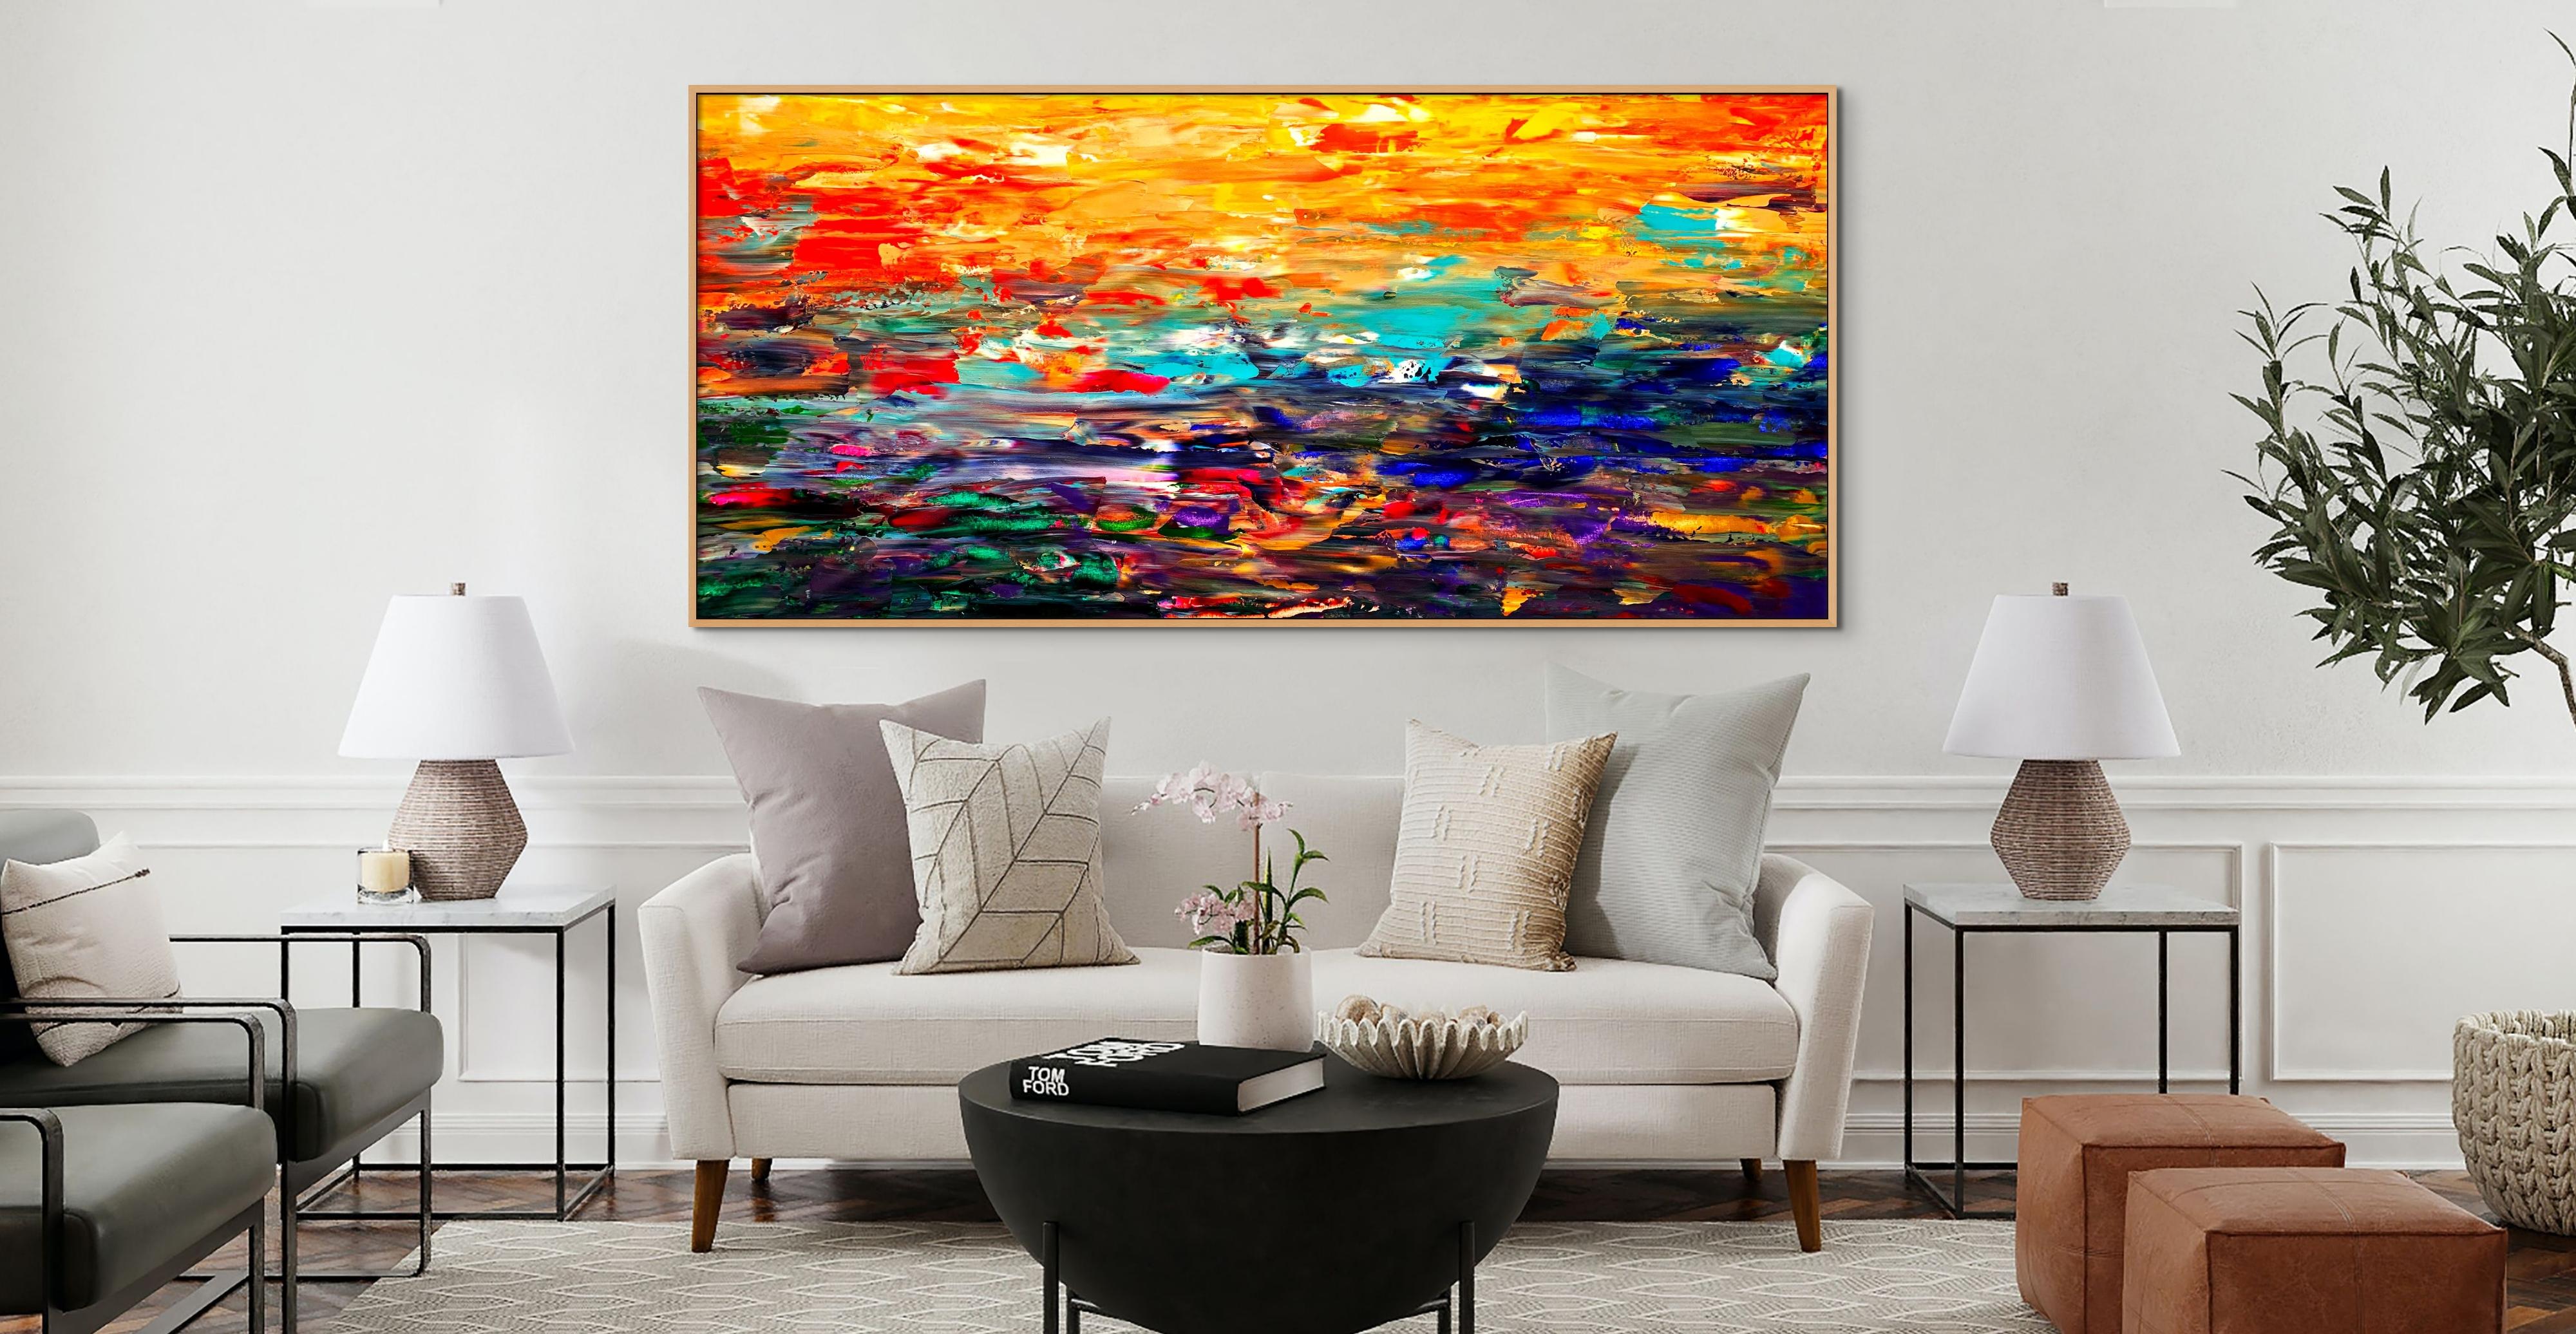 Layered Sunset - Painting by Estelle Asmodelle